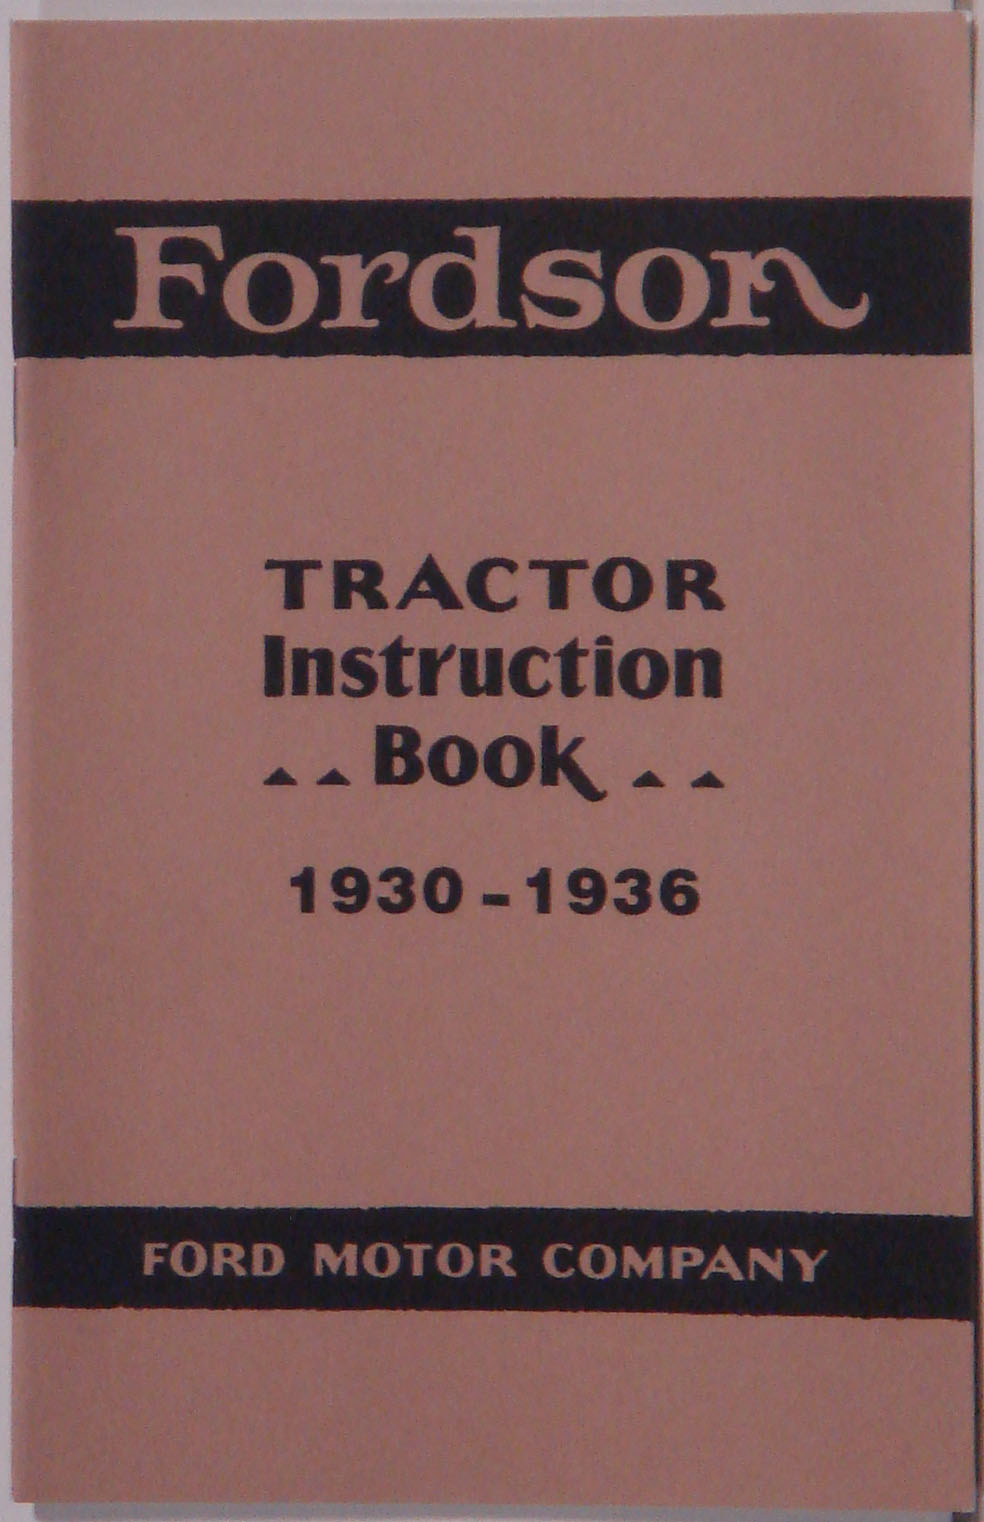 1930-36 Fordson Tractor Instrucion Manual